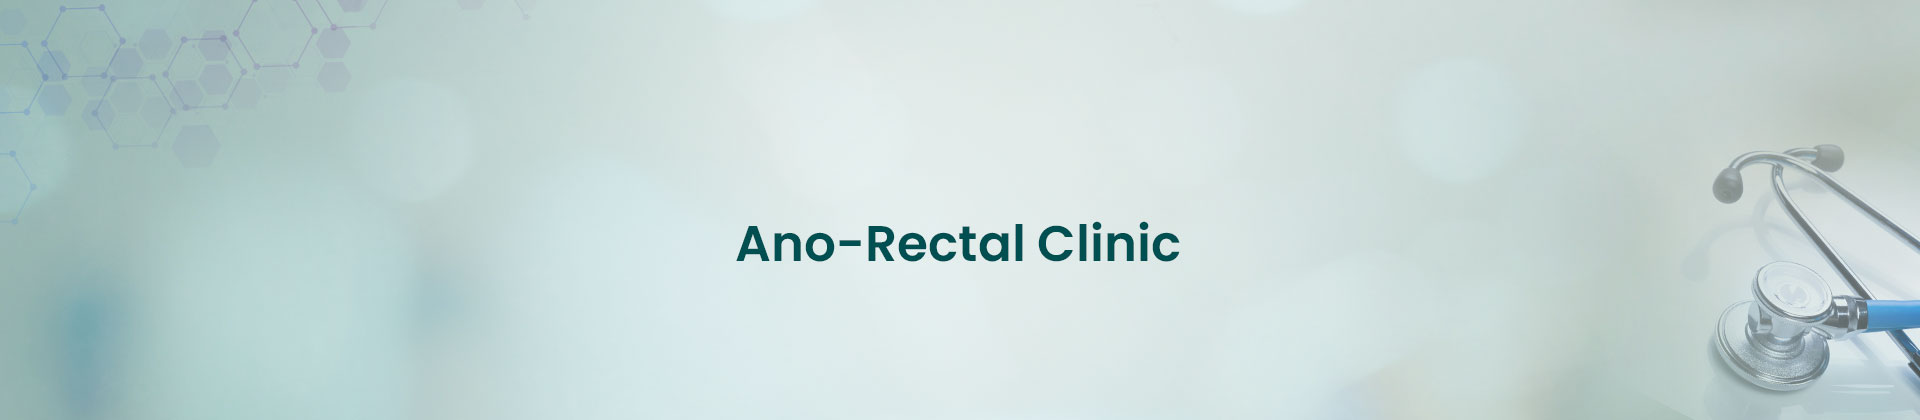 Ano-Rectal Clinic